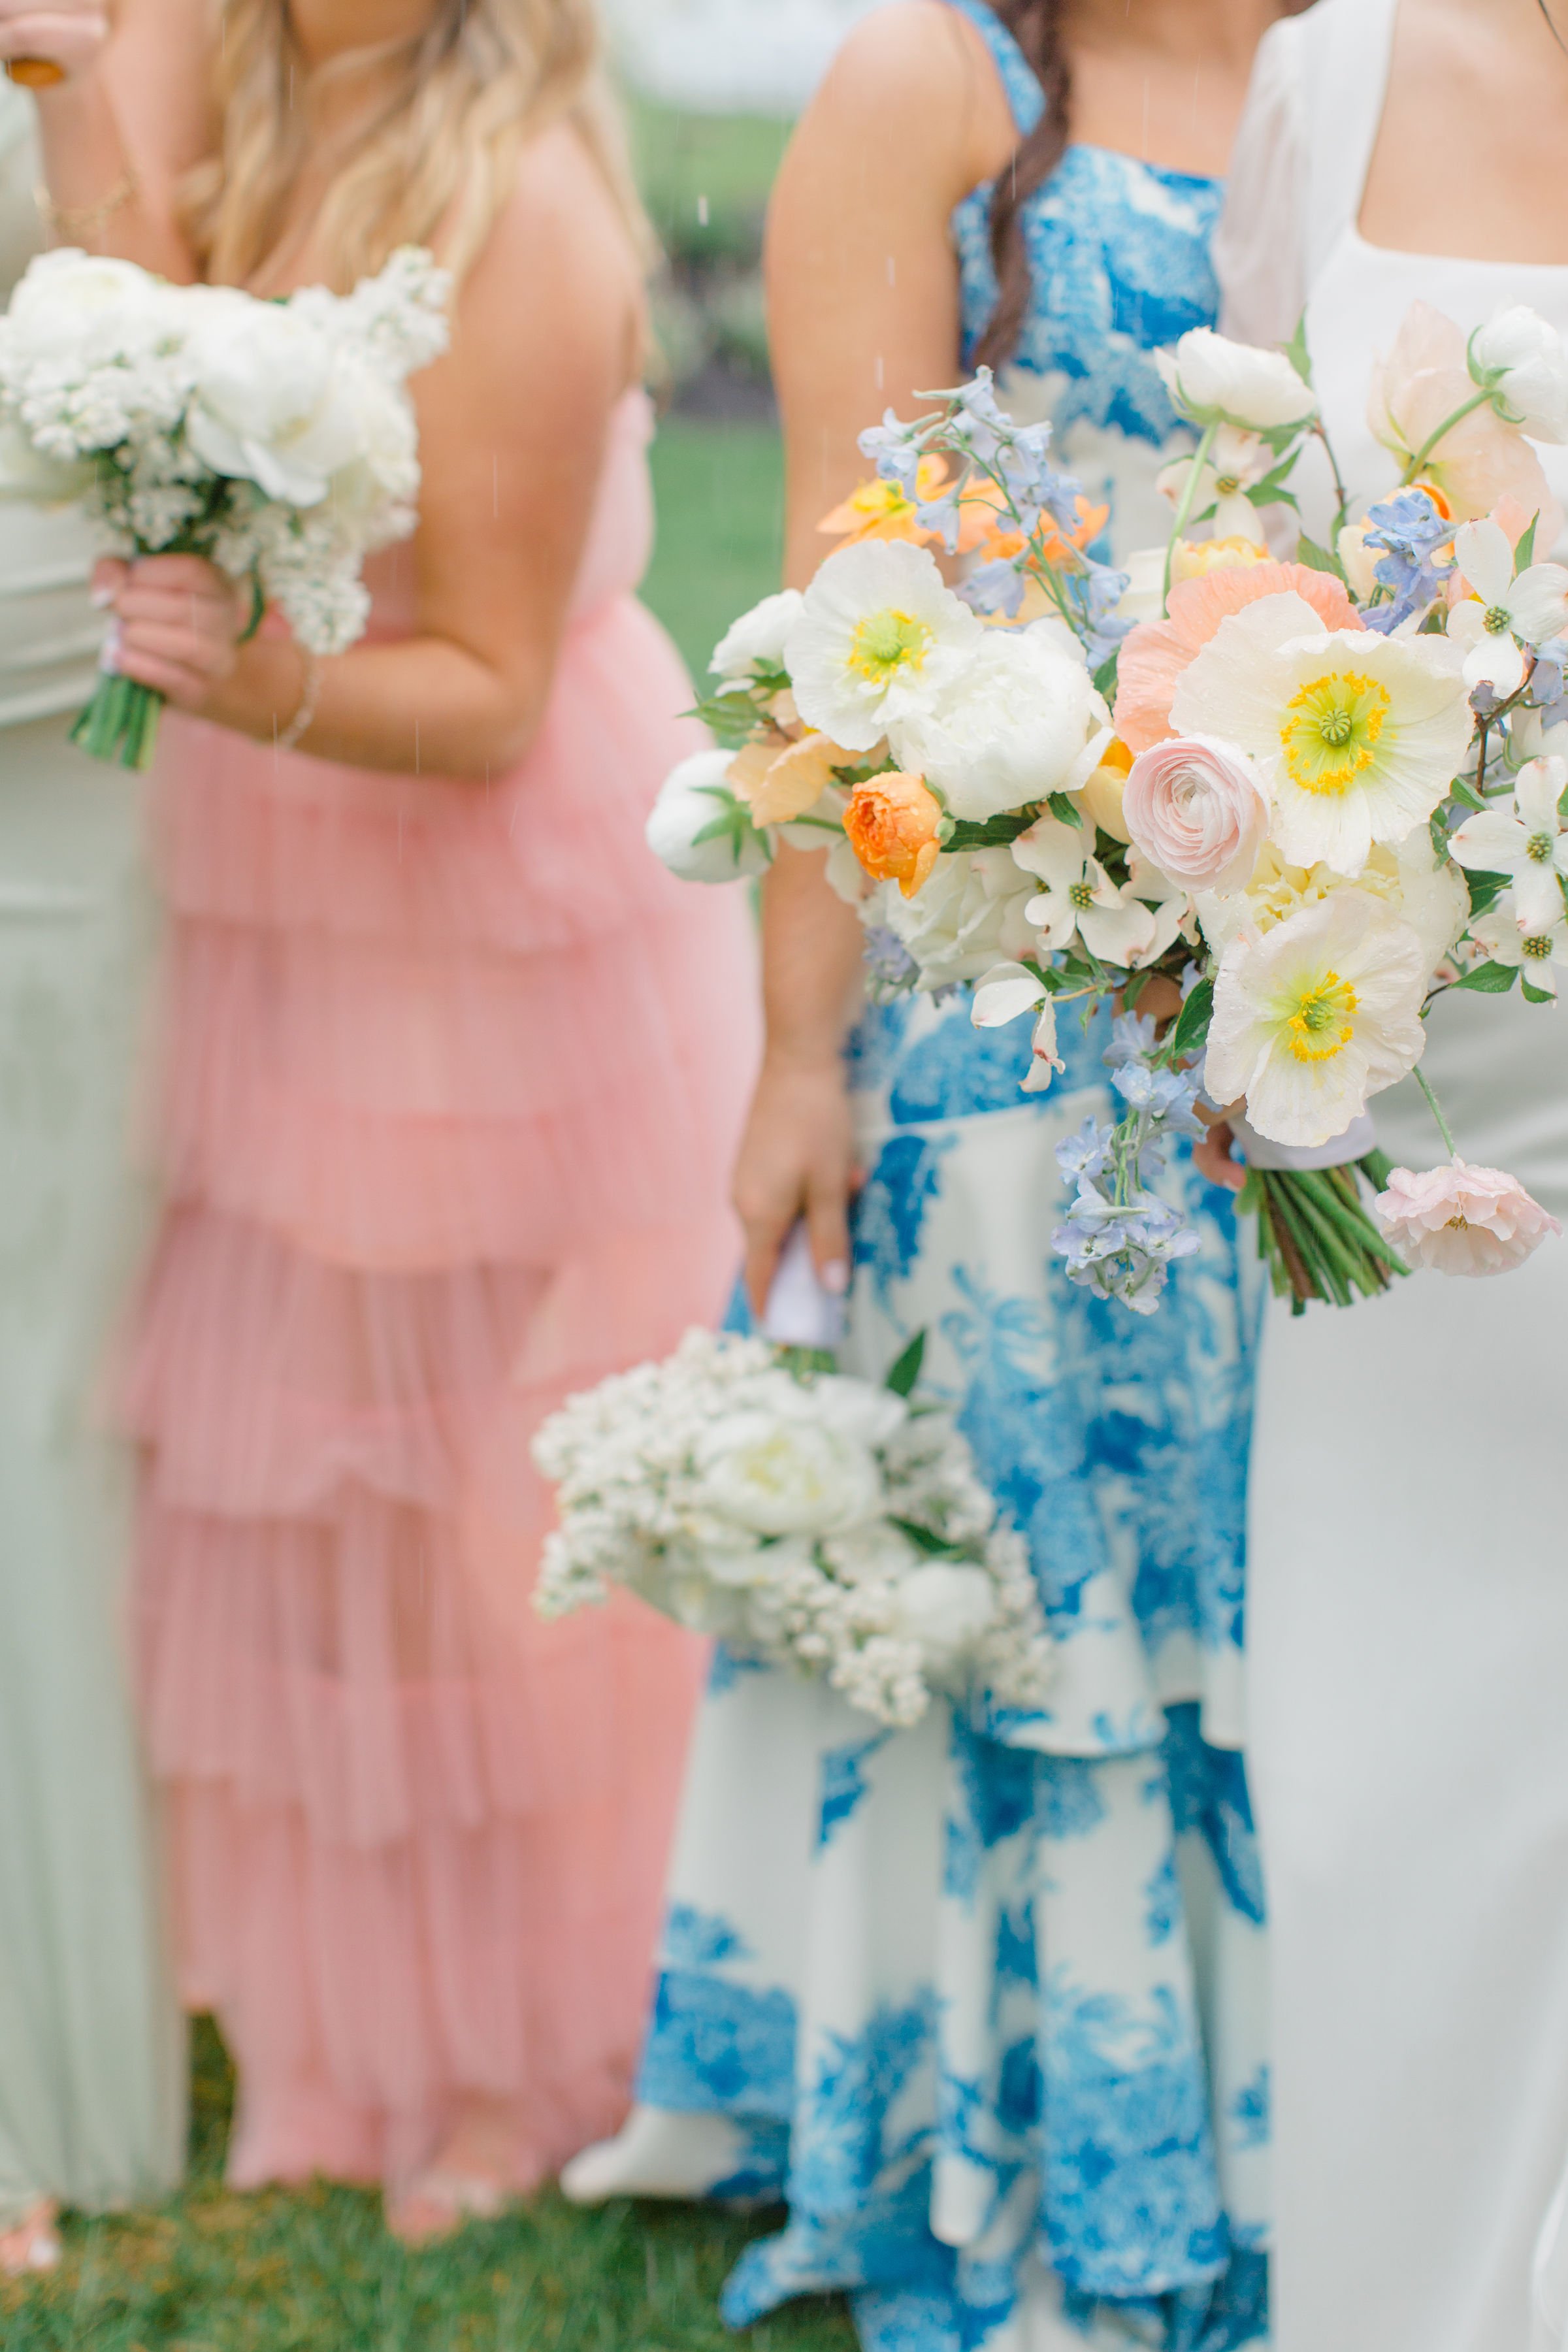 Spring Bridal Bouquets with Pops of Fun Colors